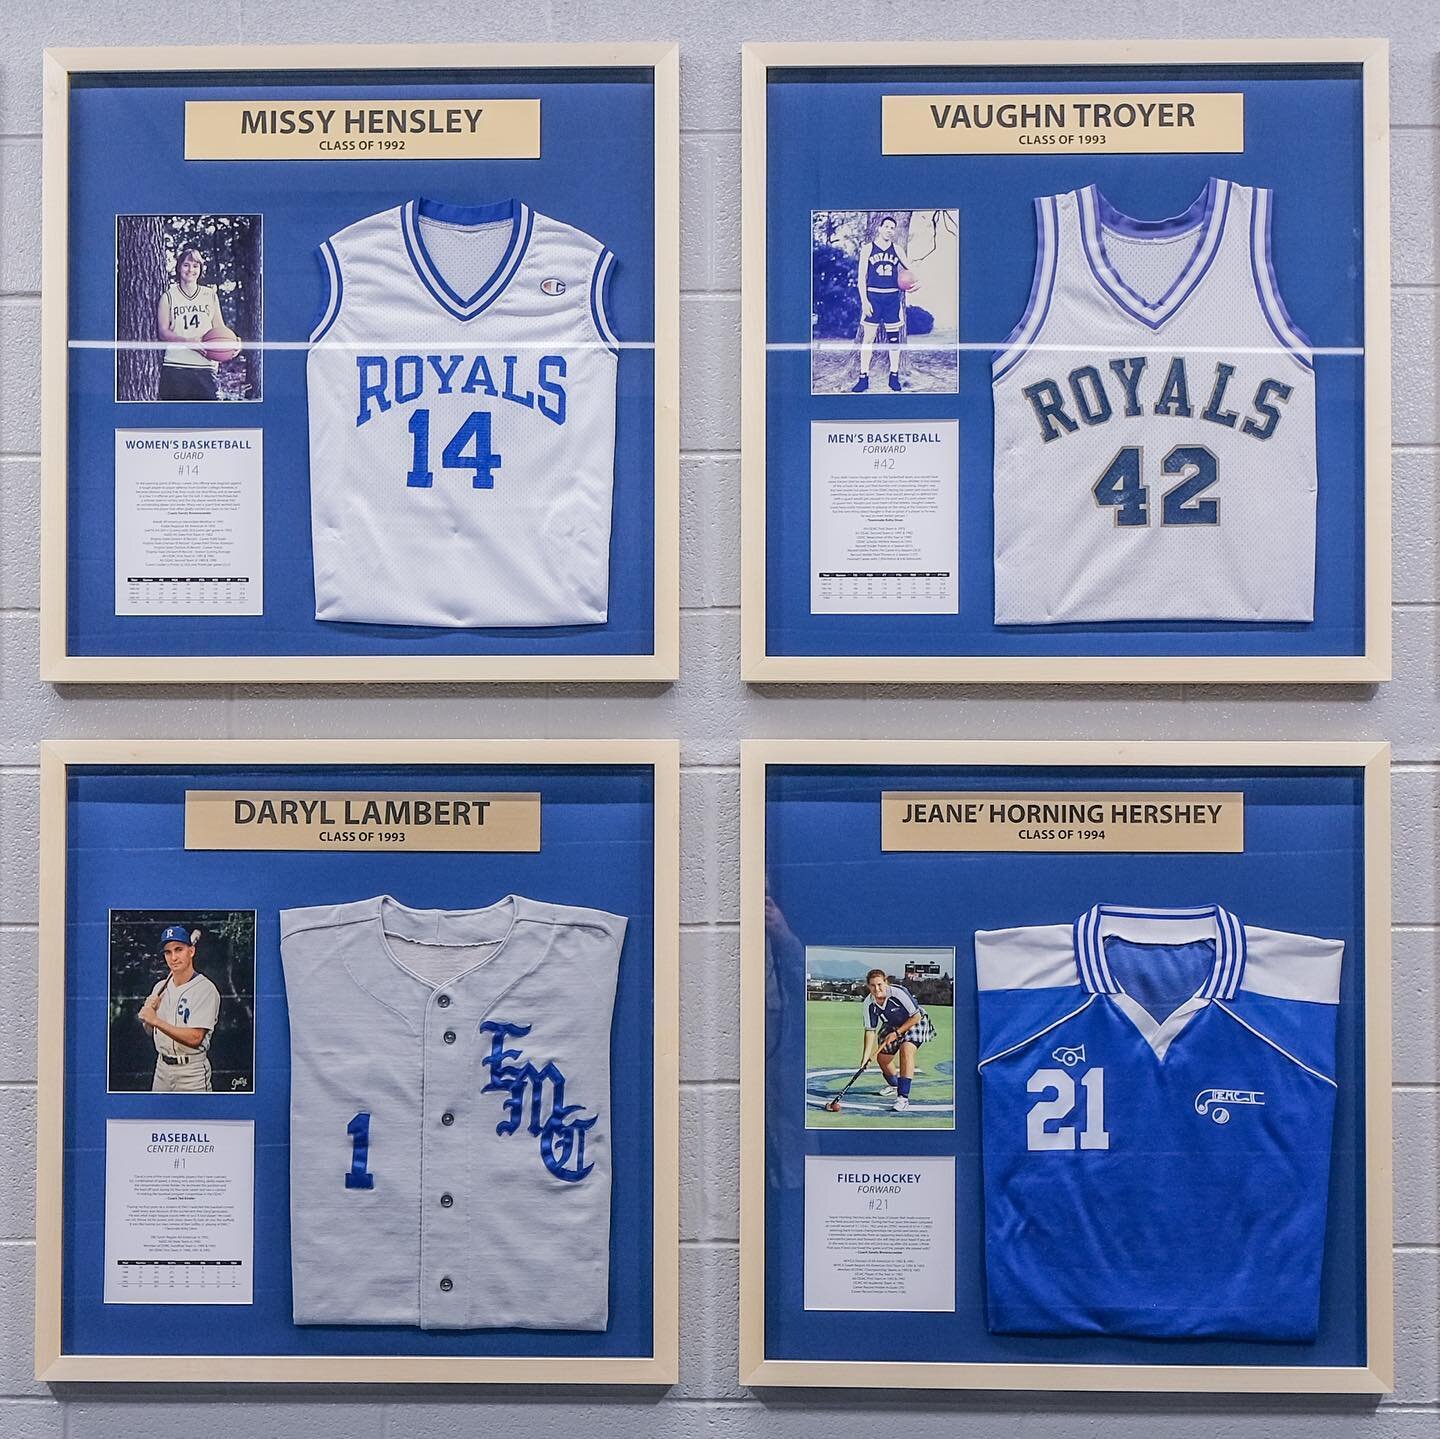 2023 was a busy year for us! So busy that we hardly had time to share all of the really cool projects we worked on. One that we&rsquo;re especially proud of is this series of jerseys for the newly renovated Hall of Honor at @easternmennoniteuniversit